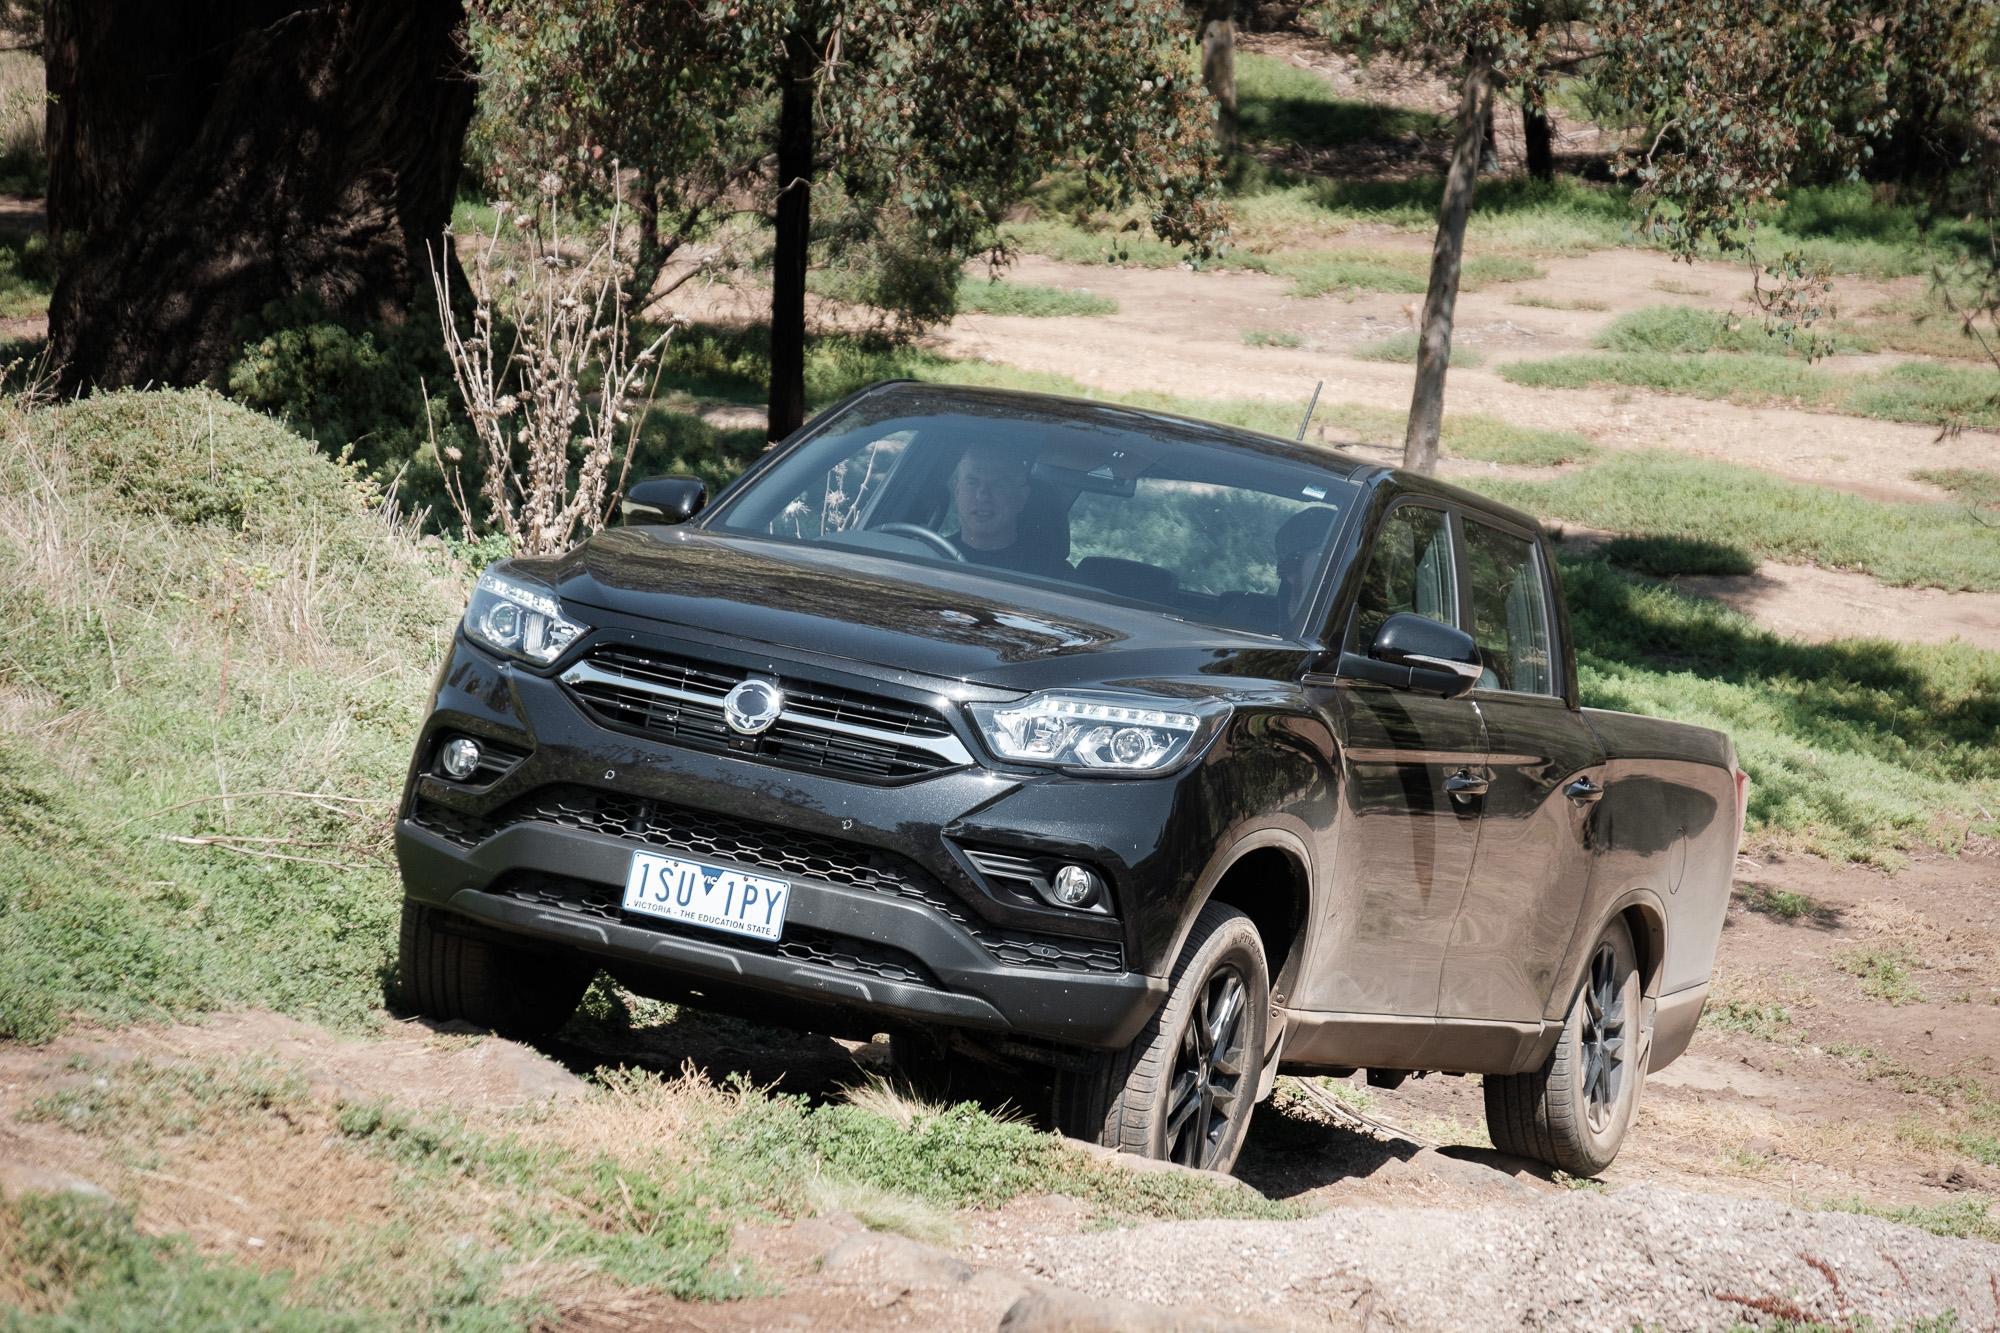 2020 SsangYong Musso EX review